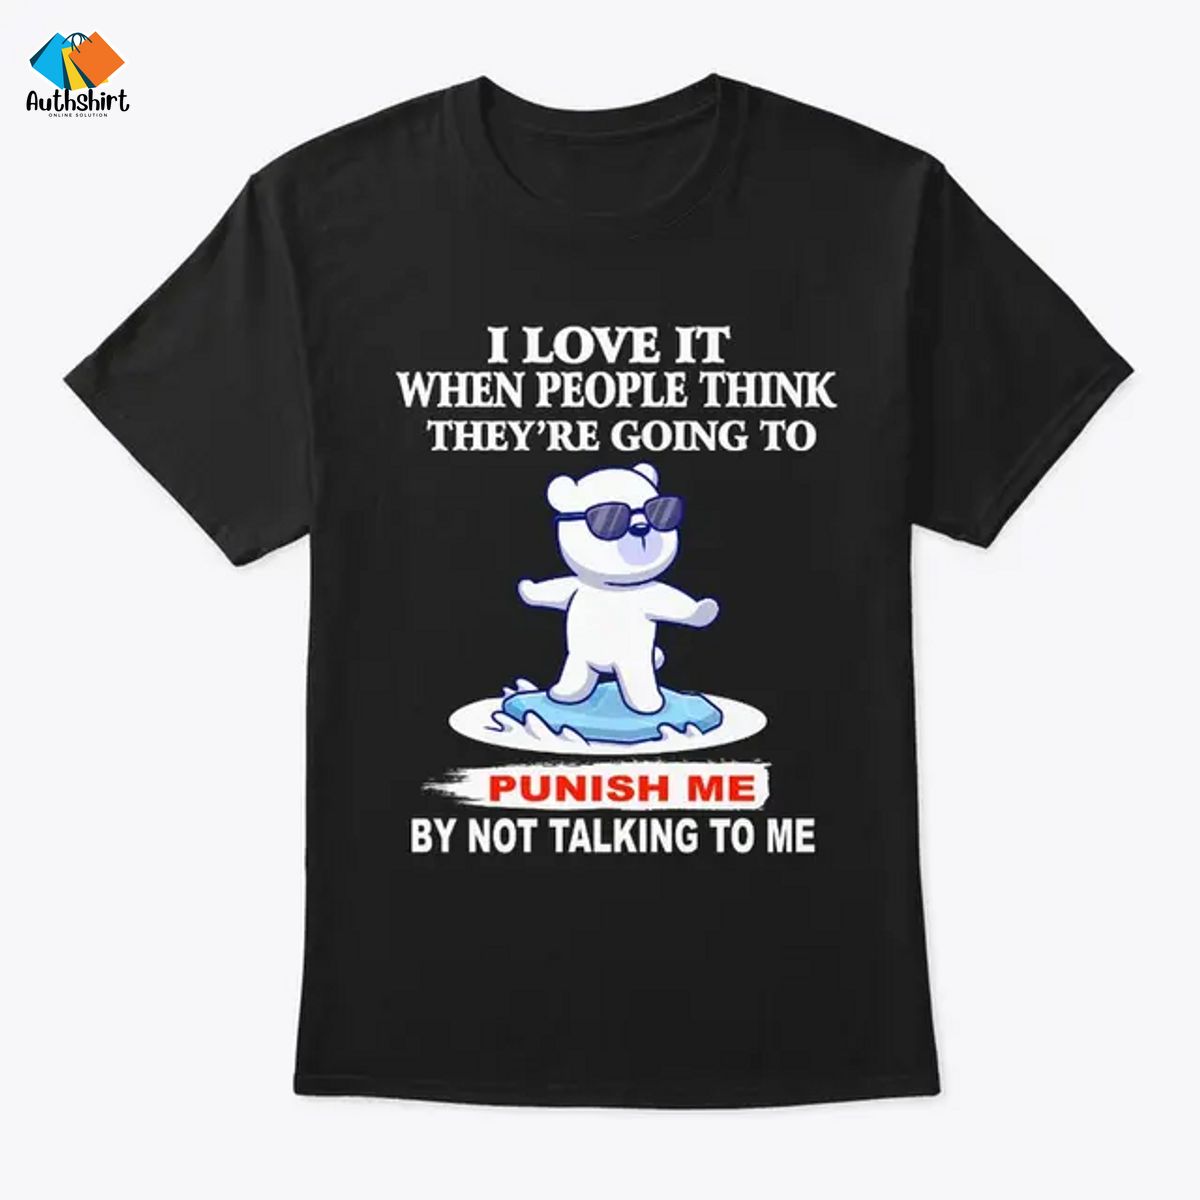 I Love It When People Think They're Going To Punish Me By Not Talking To Me Shirt